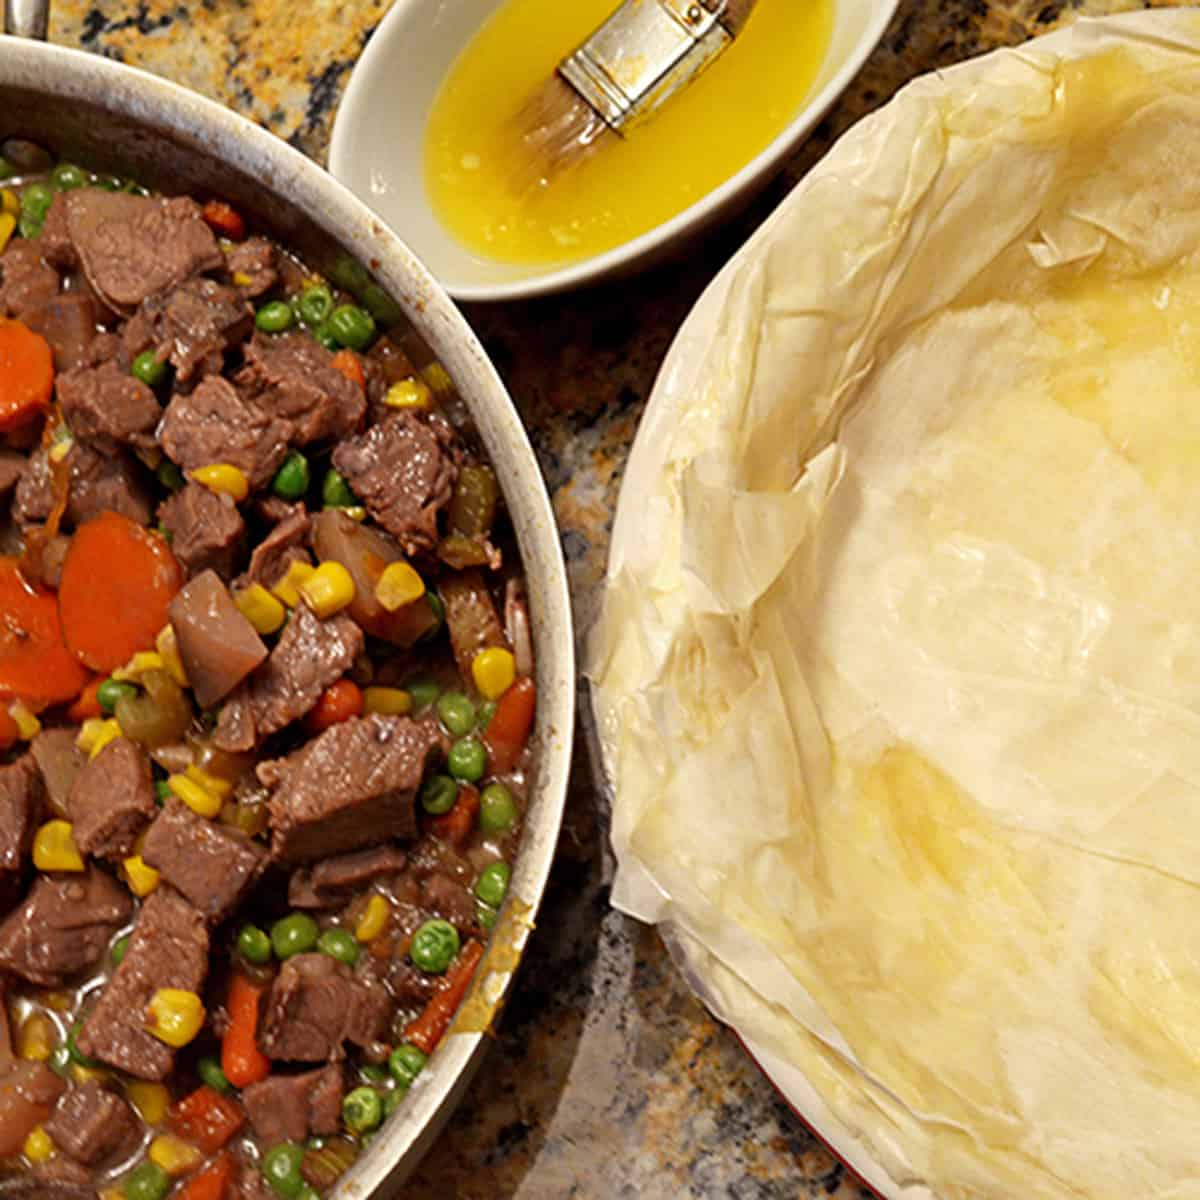 A pan of meat and a phyllo dough.